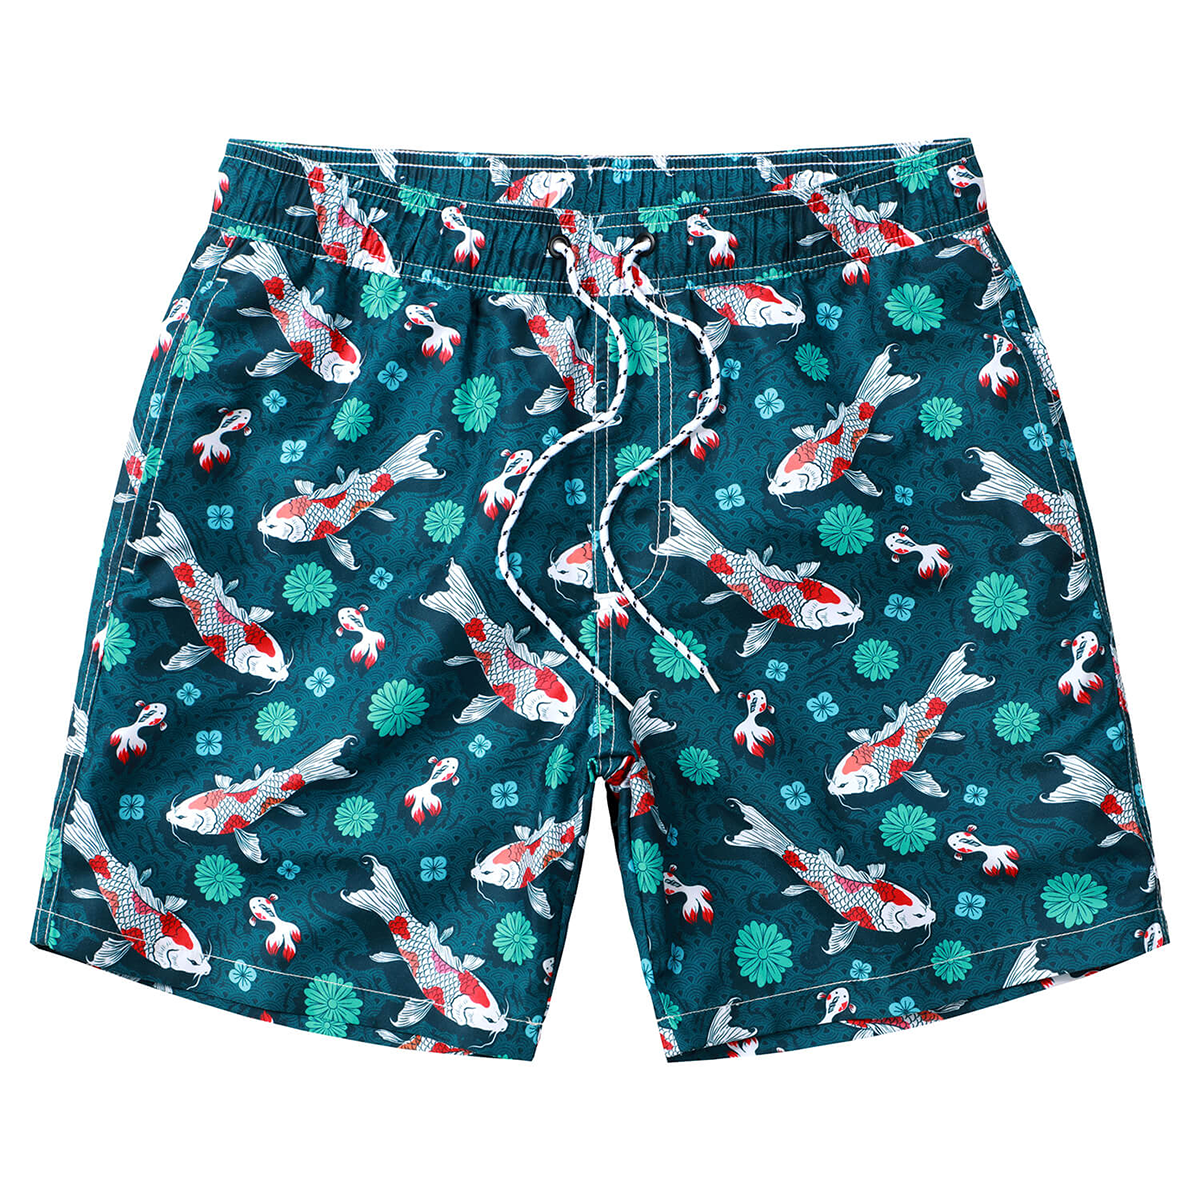 Men's Casual Funny Print Quick Dry Beach Swimming Trunks